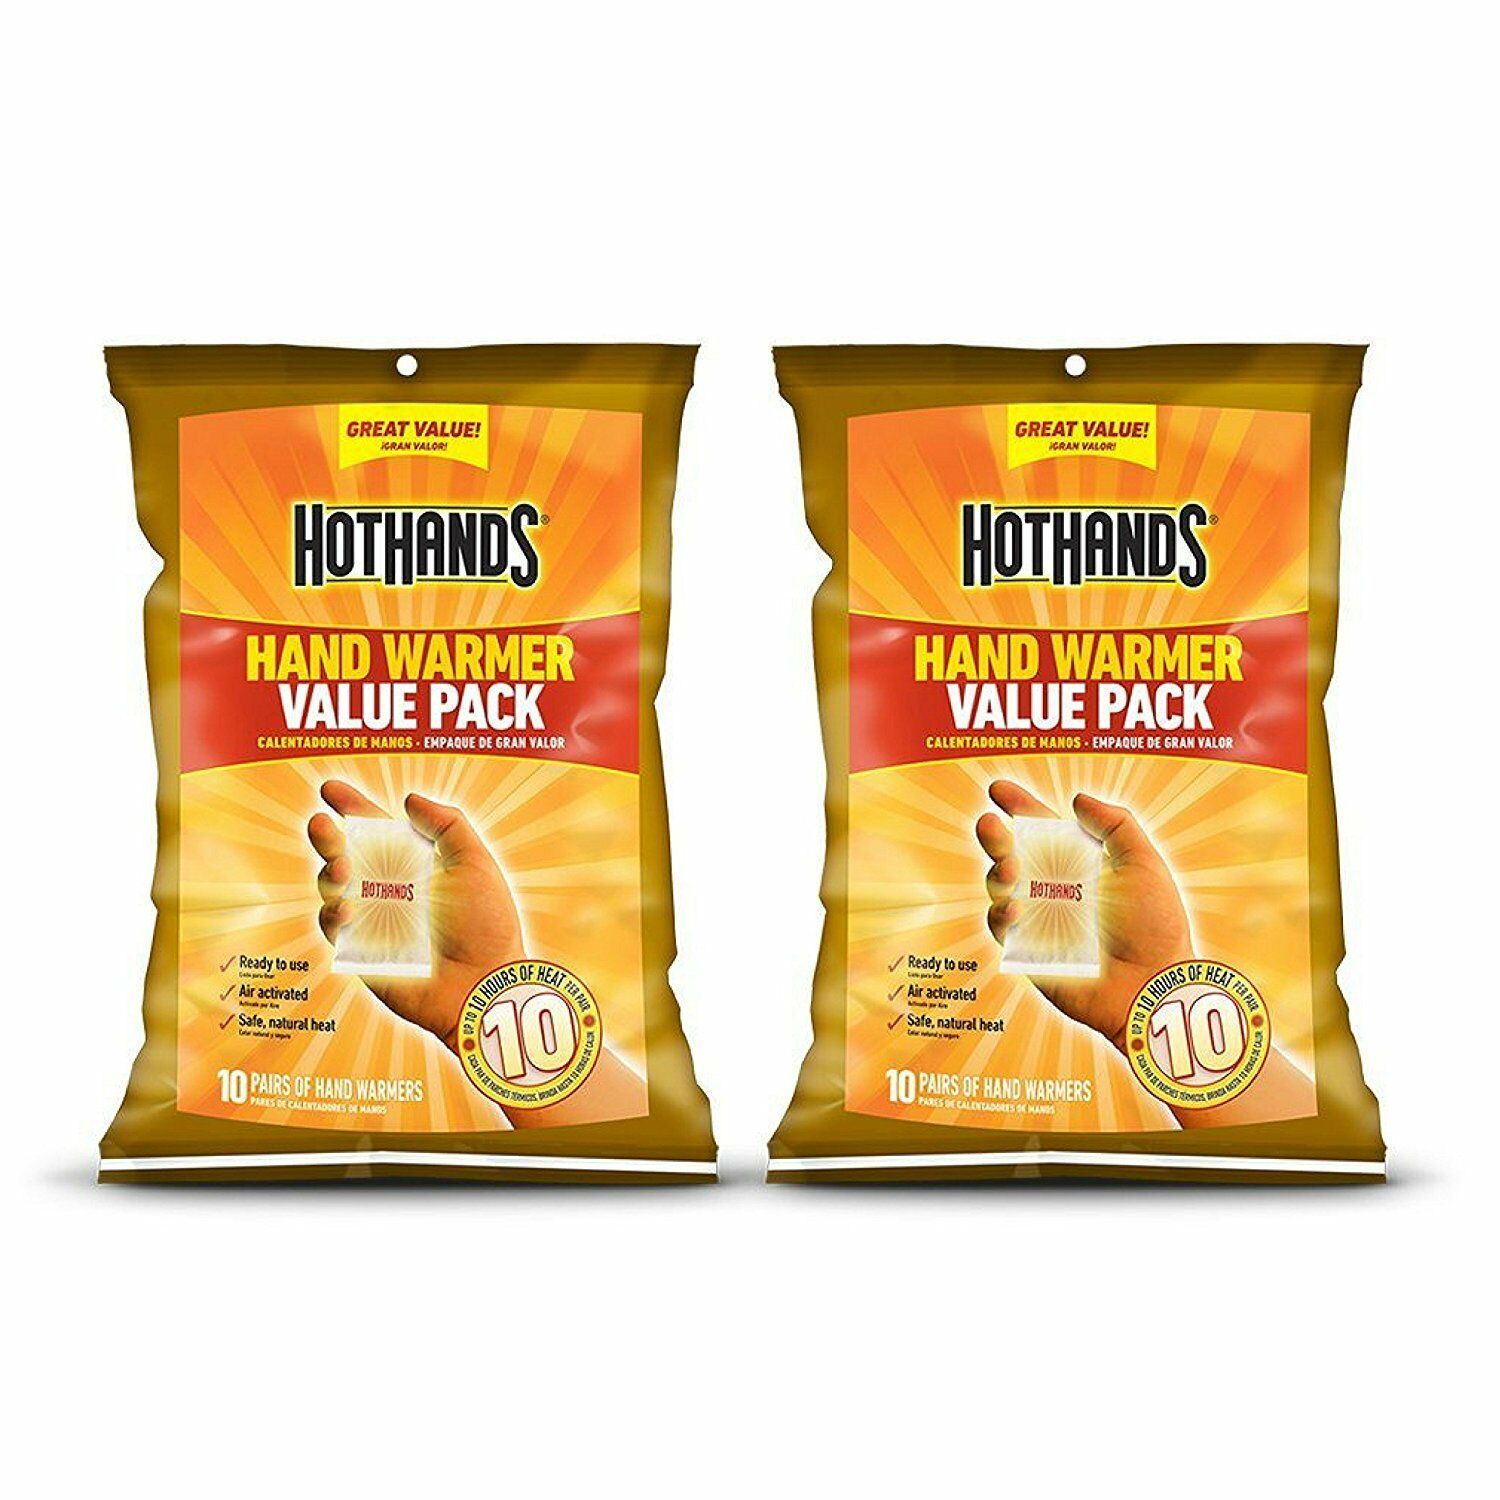 Hothands Hand Warmer Value Pack (20 Count)